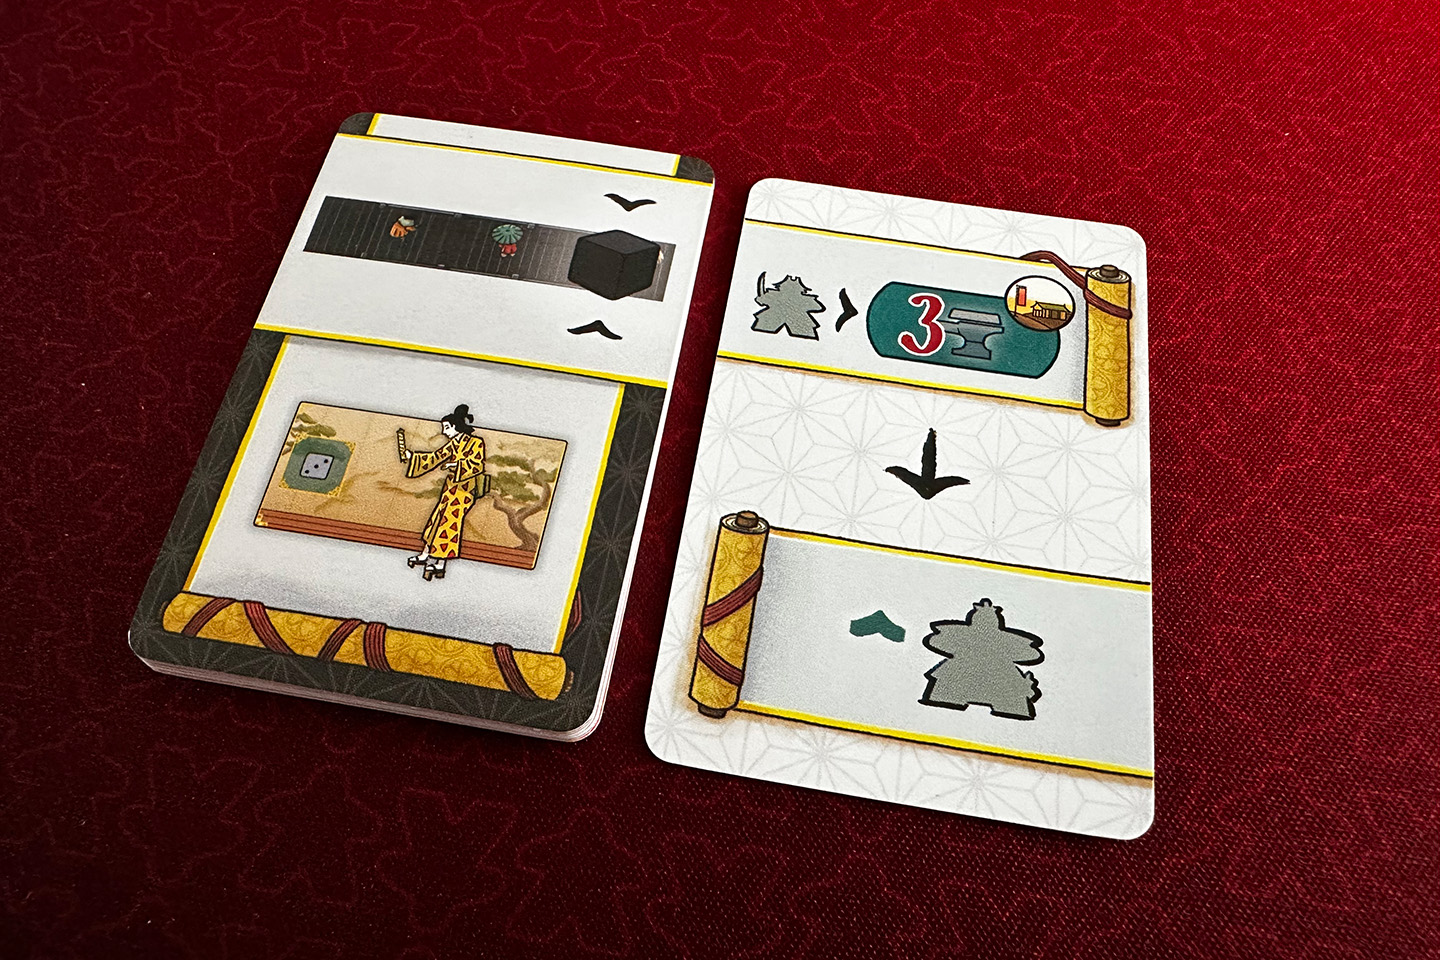 The left card tells you which die to select and where to place it. The right card tells you which actions to take. In this case, place a warrior on the training yard that requires three iron and move a courtier up one level.